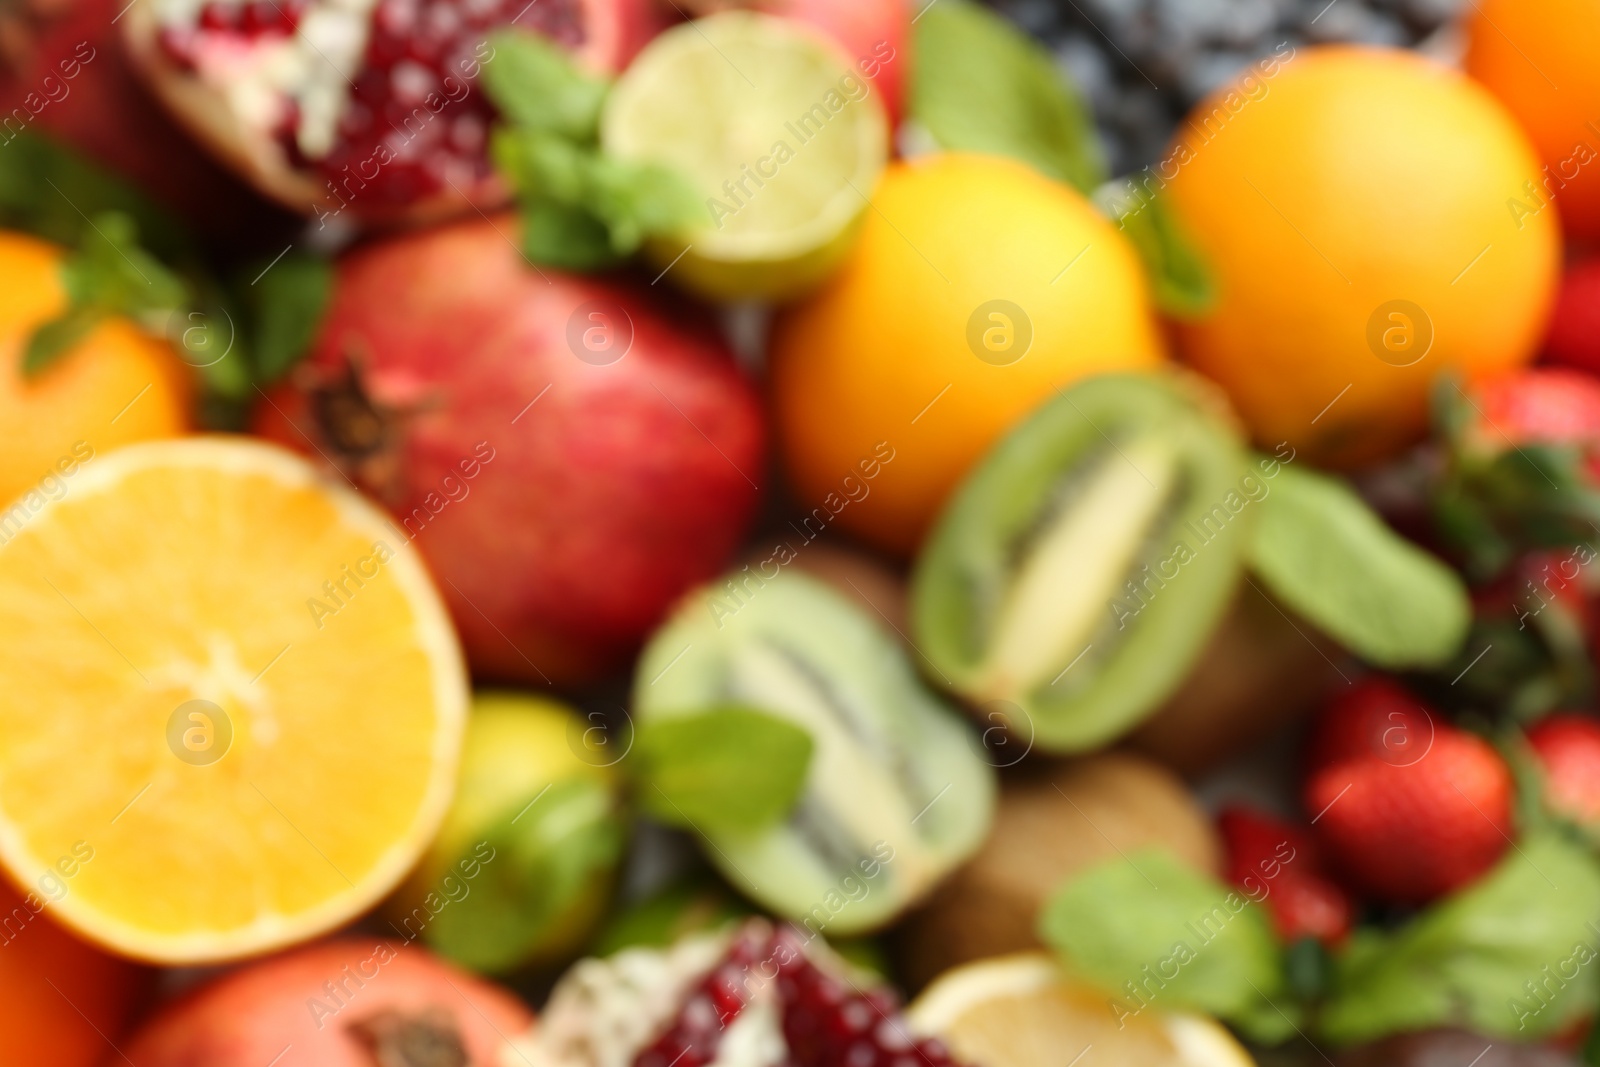 Photo of Many different fruits as background, blurred view